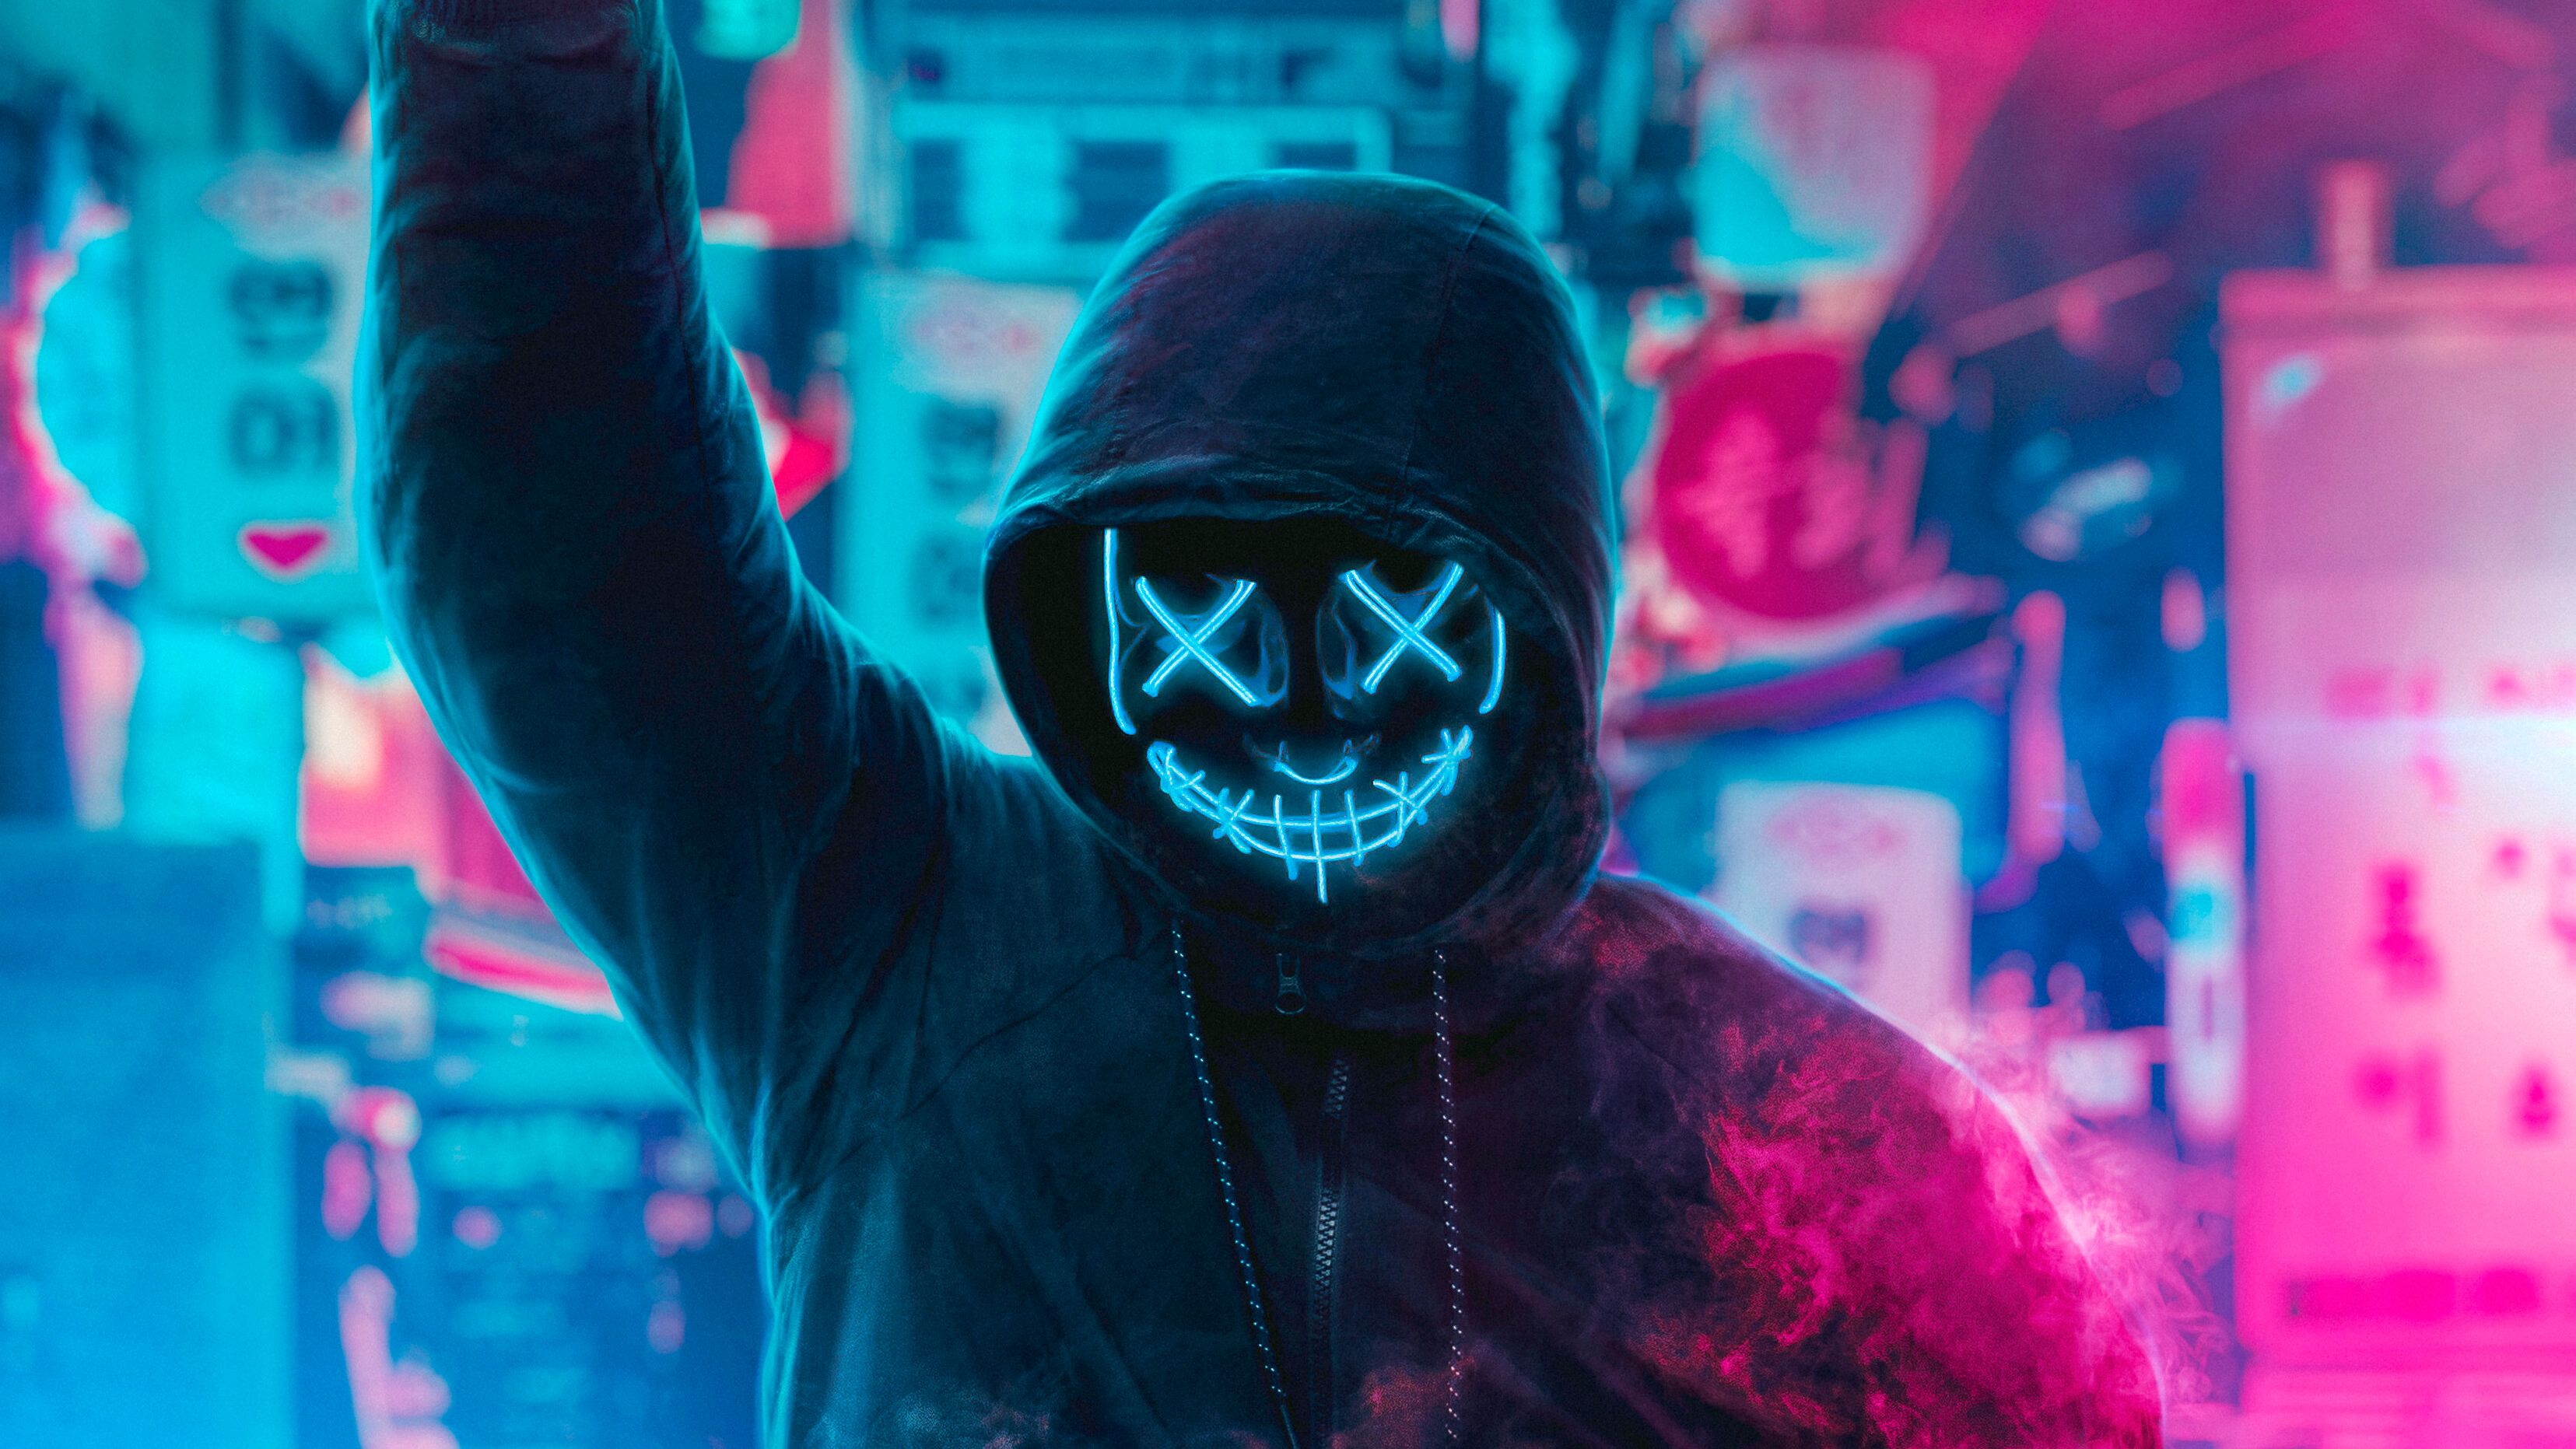 Mask Guy Neon Eye 1680x1050 Resolution HD 4k Wallpaper, Image, Background, Photo and Picture